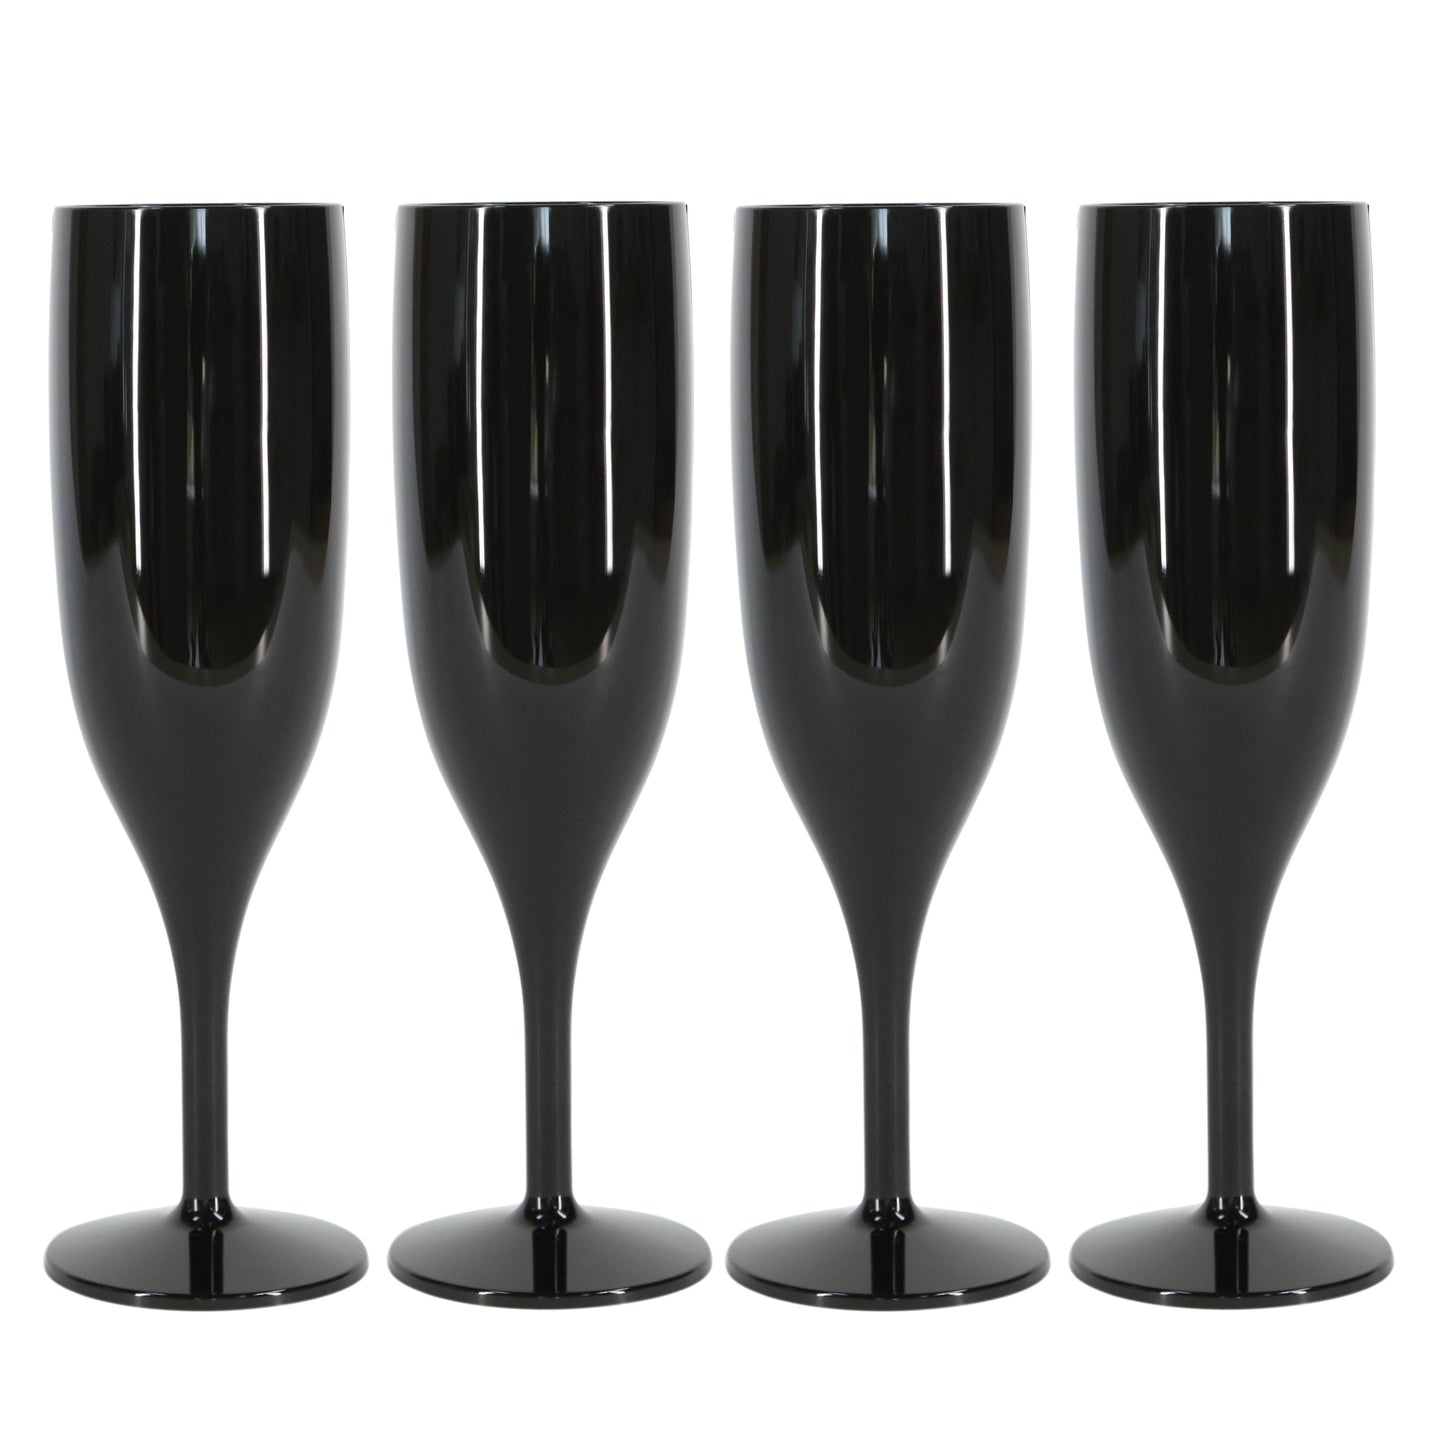 12 x Black Prosecco Flutes – Made from Strong Reusable Plastic 1-Piece Champagne Glass (Pack of 12 Glasses) Halloween, Parties, Hot Tub-5056020186823-EY-PP-120-Product Pro-Baby Shower, Black Champagne Flutes, Black Champagne Glasses, Black Flutes, Black Prosecco Flutes, Black Prosecco Glasses, Bridal Shower, Halloween, Hen Do, Reusable Flutes